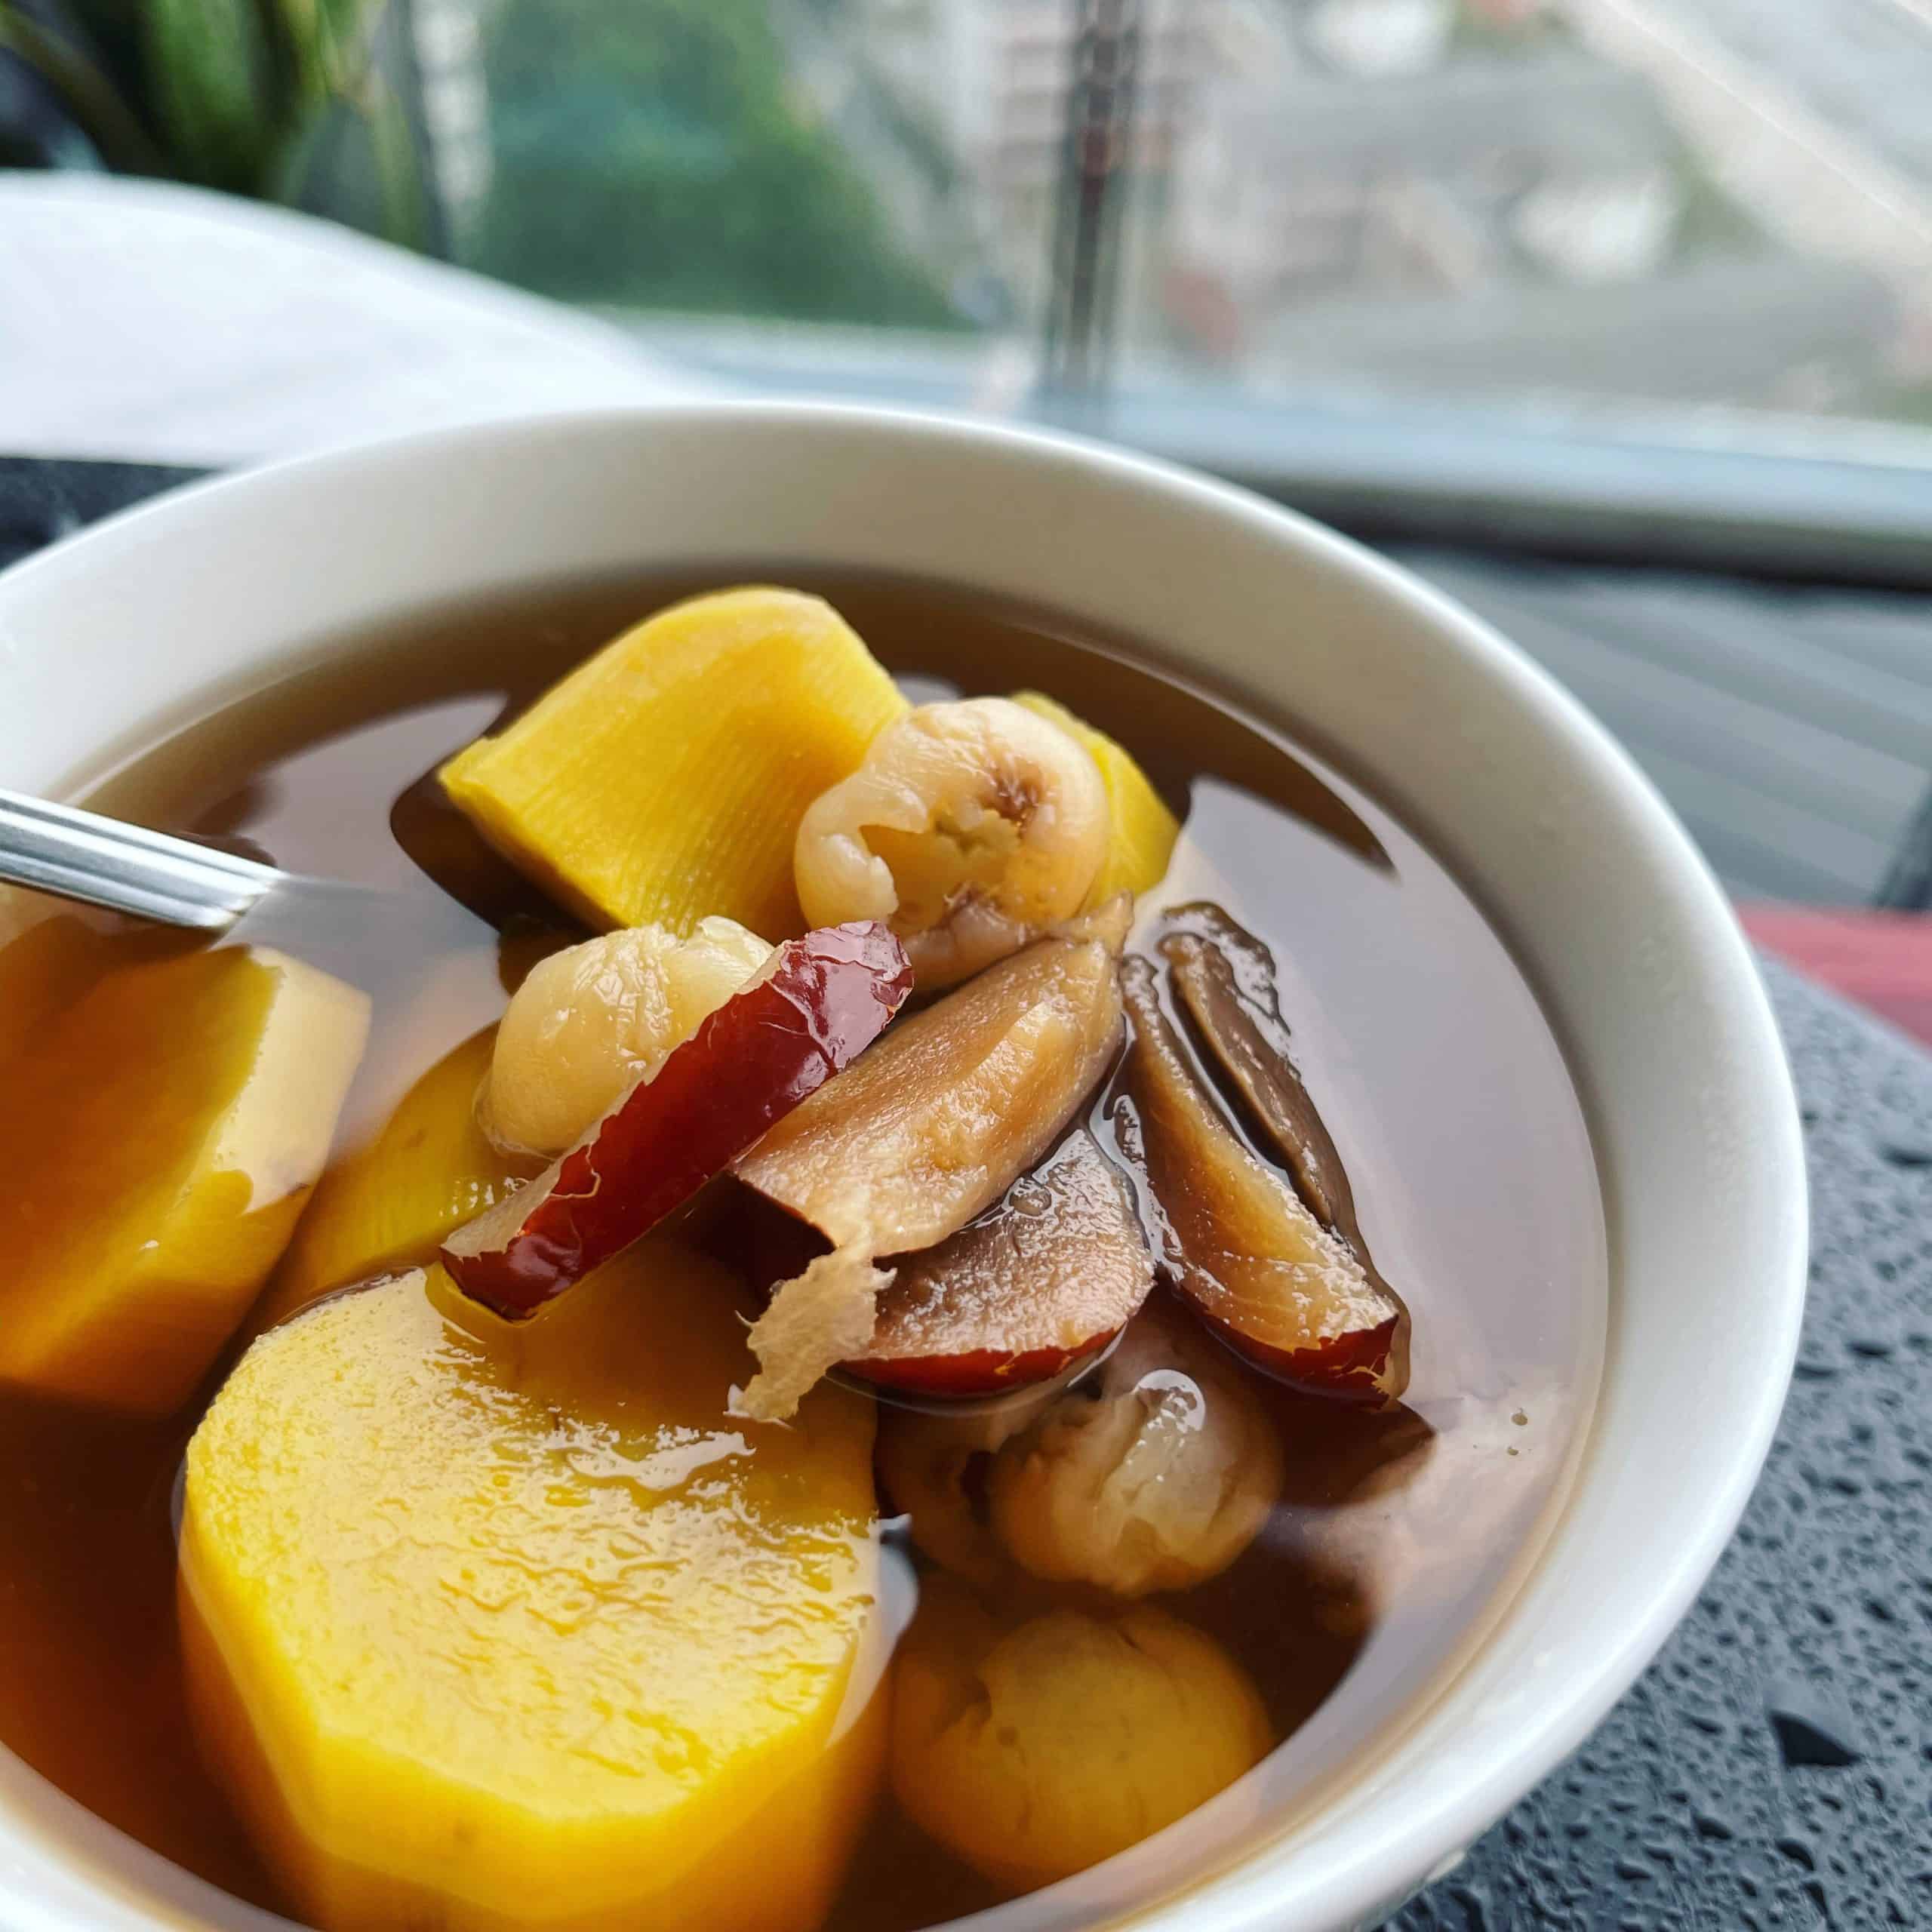 My Wok Life Cooking Blog - Honey Sweet Potato & Ginger Soup (地瓜甜姜汤) : Steaming Hot Soup for Rainy Day -